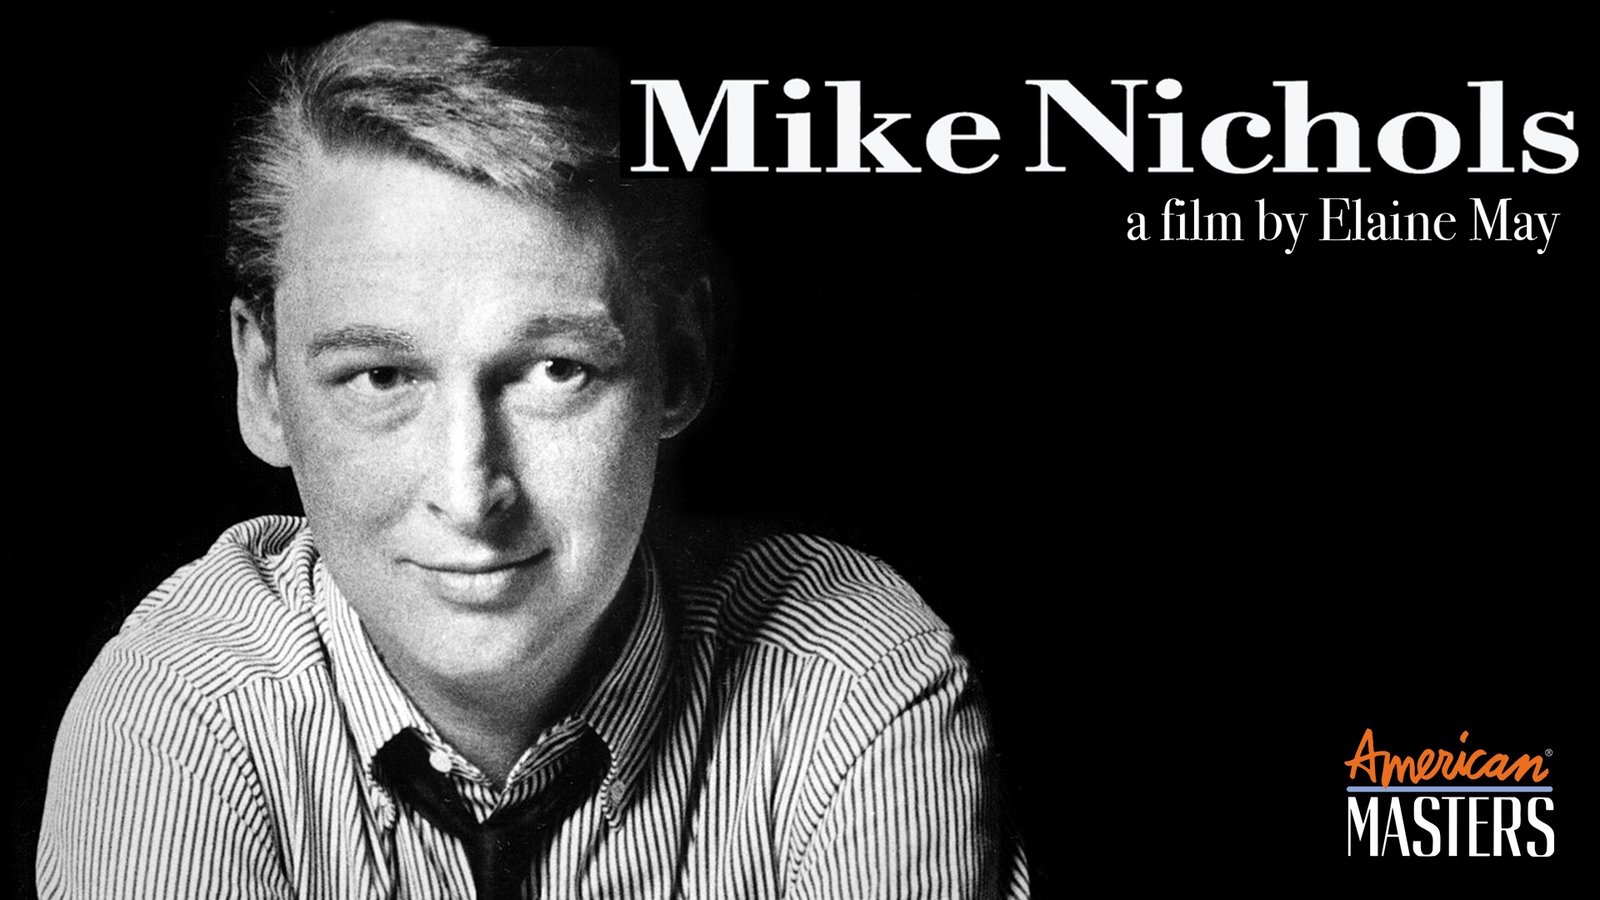 American Masters: Mike Nichols - The Career of a Legendary Filmmaker